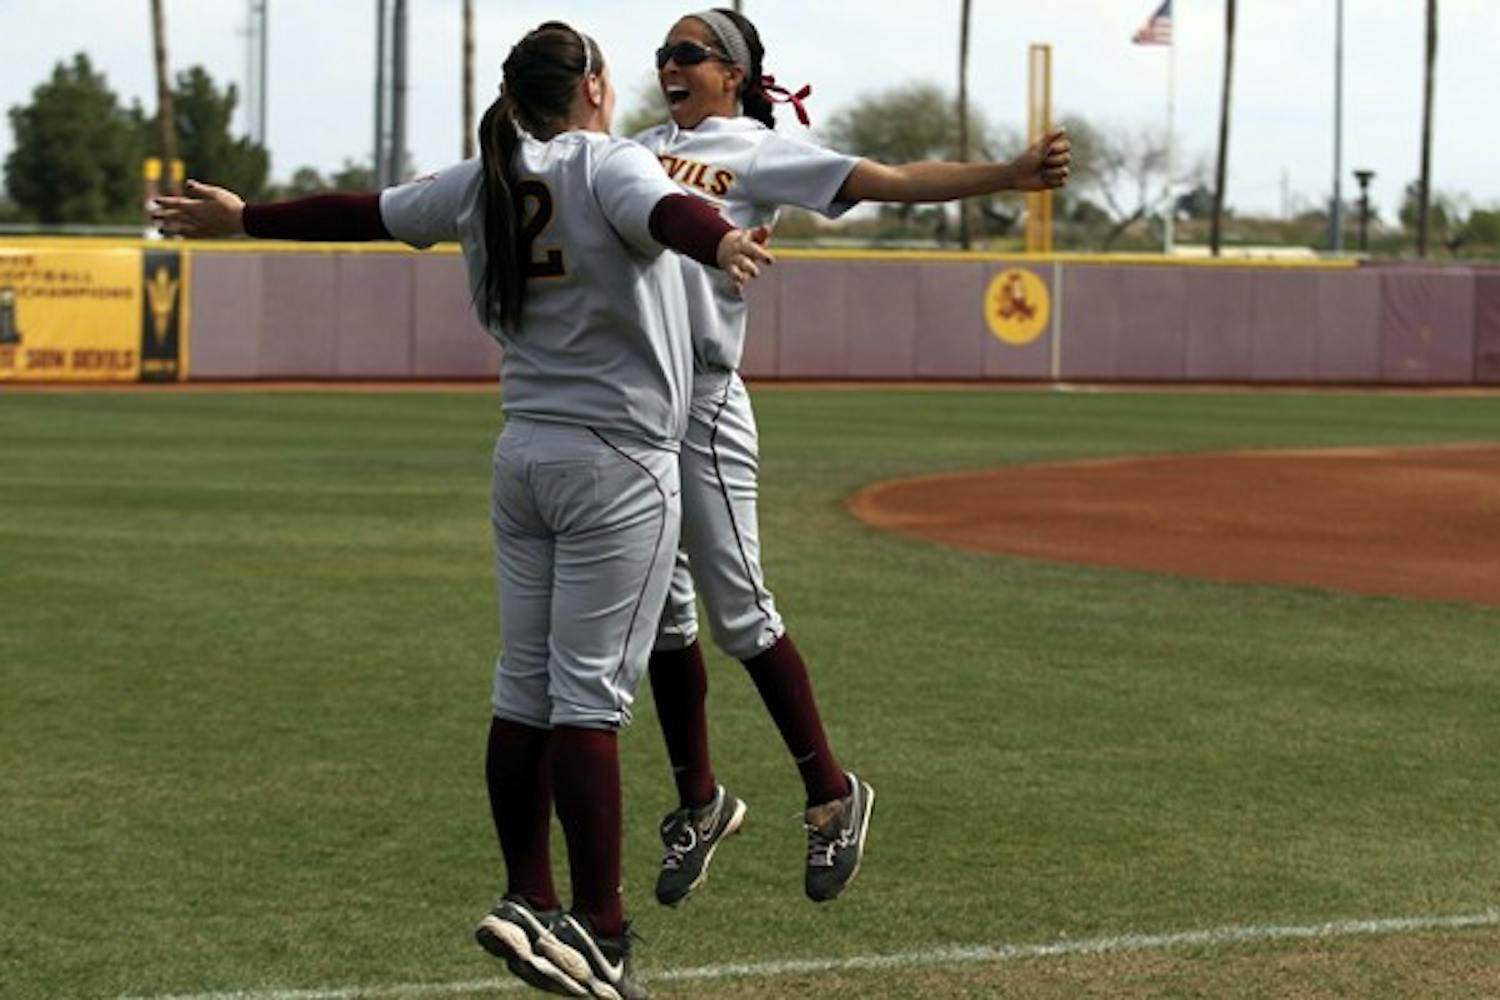 Alix Johnson and Dallas Escobedo celebrate at a game against New Mexico State on March 11. Johnson leads the Sun Devils with a .558 batting average. (Photo by Jenn Allen)